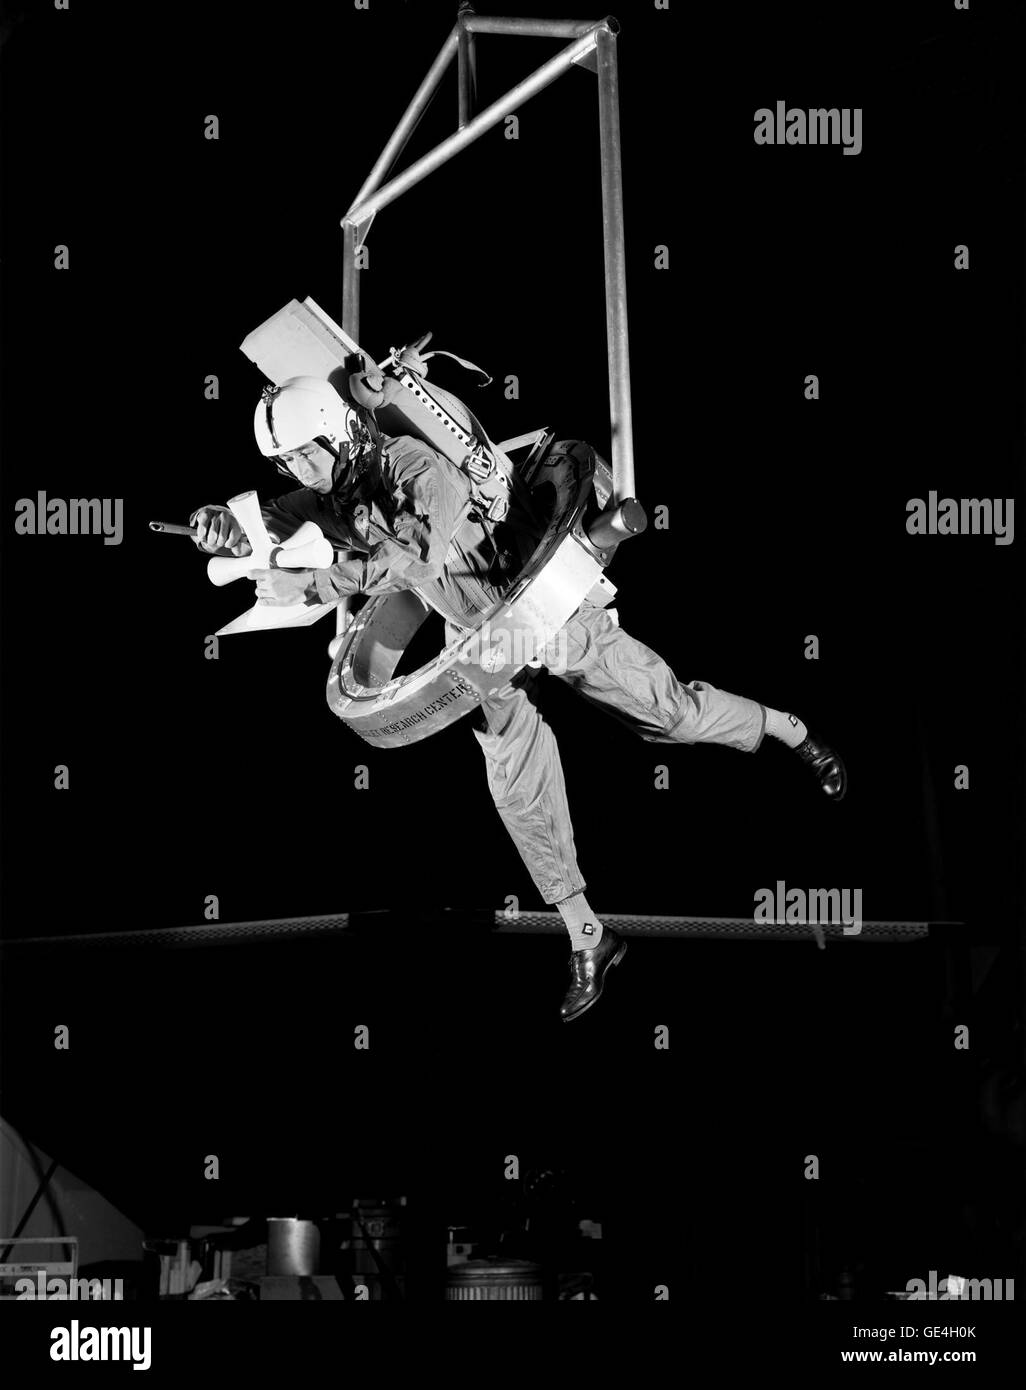 OMEGA (One-Man Extravehicular Gimbal Arrangement) shown here permits unlimited freedom, and was designed around a parallel pair of 32-inch-diameter thin-line angular-contact bearings with half the balls removed to minimize friction. Tests were conducted with OMEGA subjects in flight suits and pressure suits to determine the best gimbal restraint system and operation techniques. The test subjects were suspended in a sling support from a single RDS cable. As they translate about, the RDS tracks them, keeping the cable vertical. The test subjects operate in an effectively zero-g environment in th Stock Photo